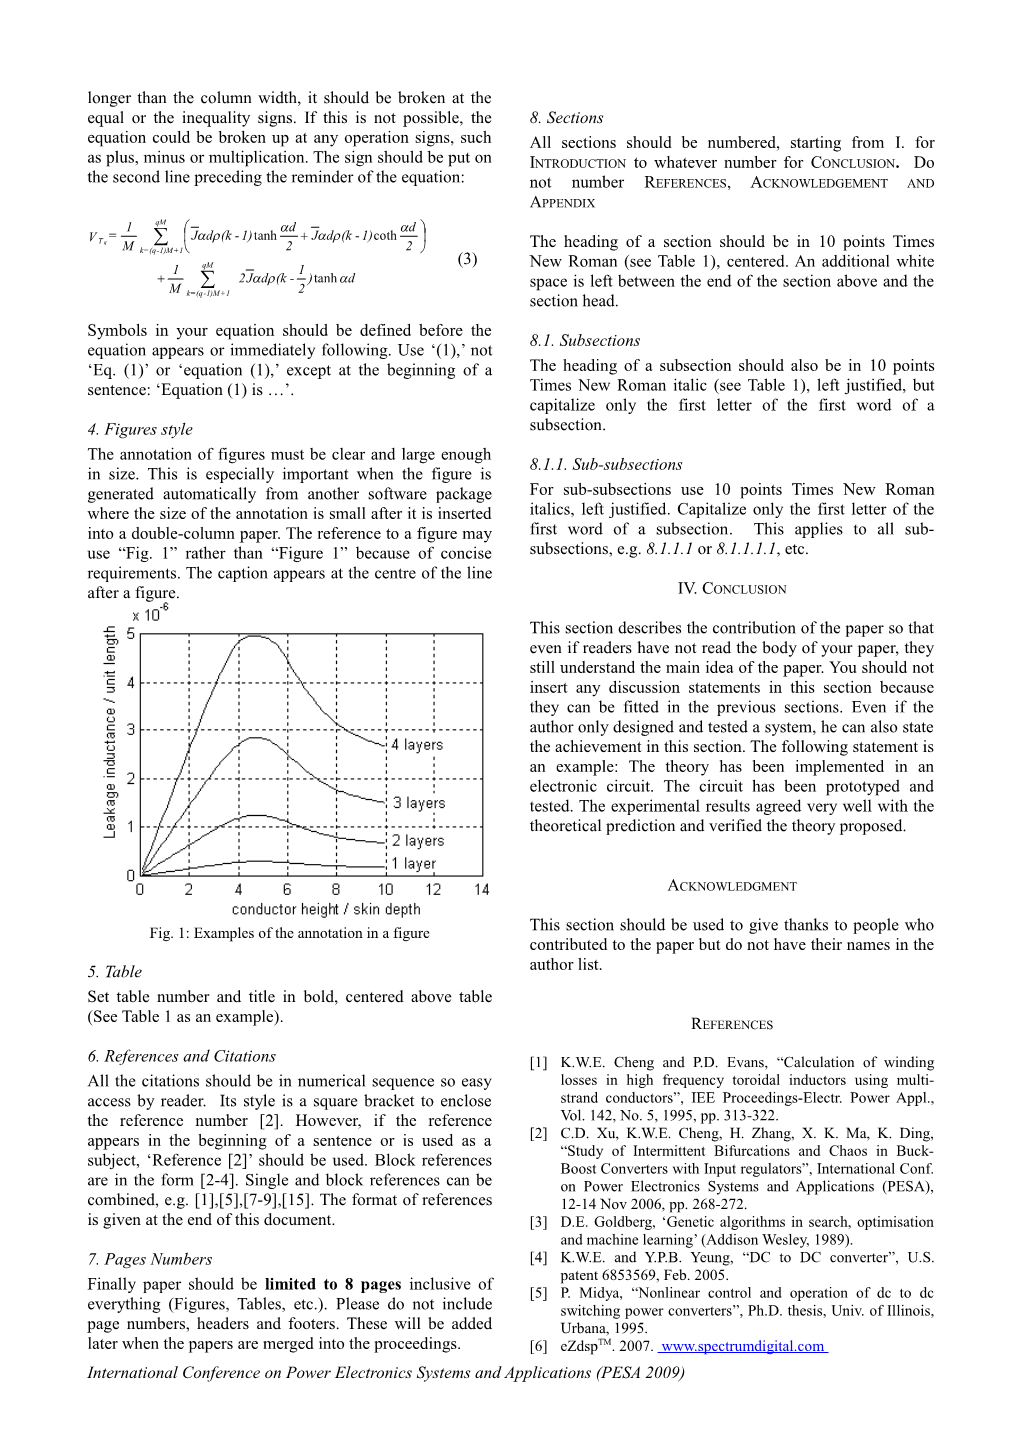 Guidelines for Preparation a Two-Column Paper for an Engineering Journal